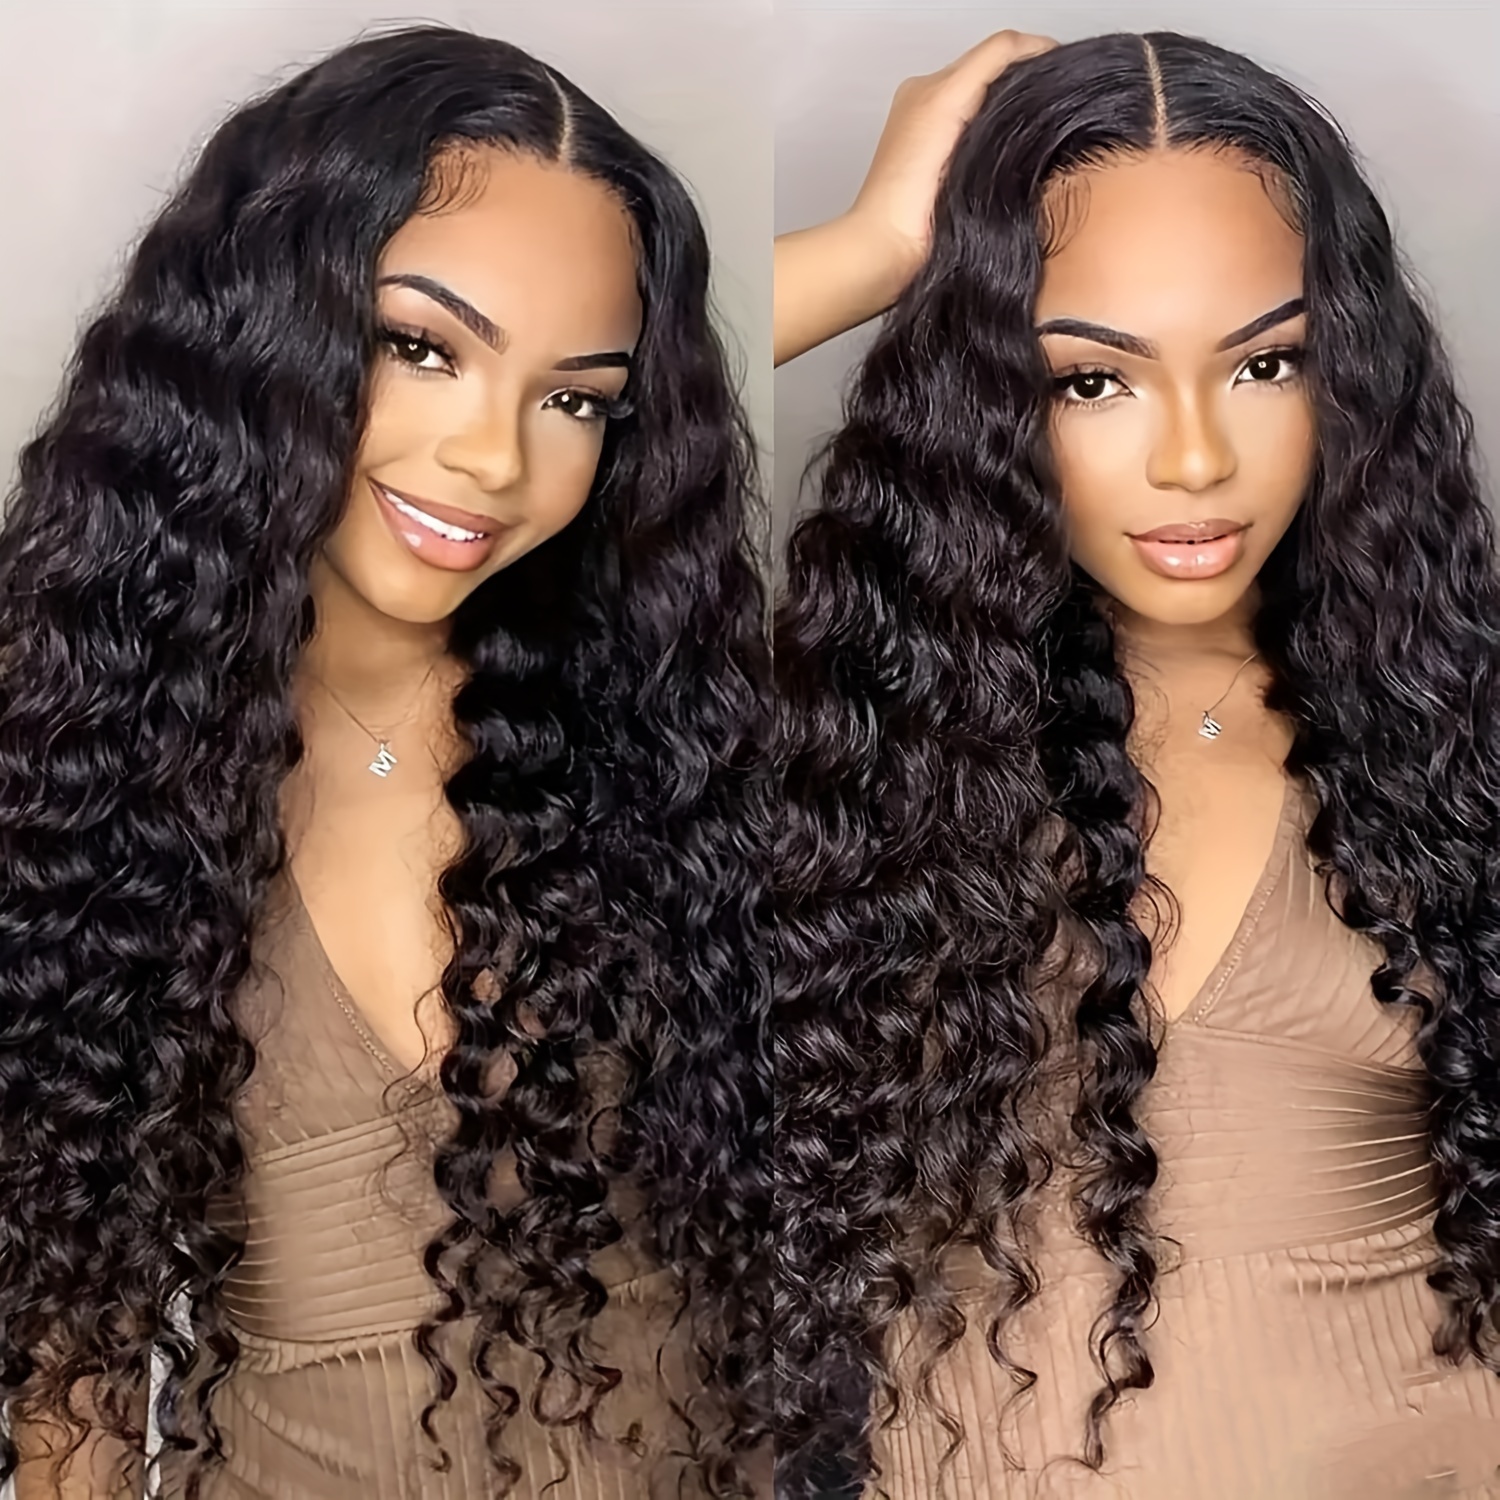 Luvin Deep Wave 13x6 HD Transparent Lace Frontal Human Hair Wigs